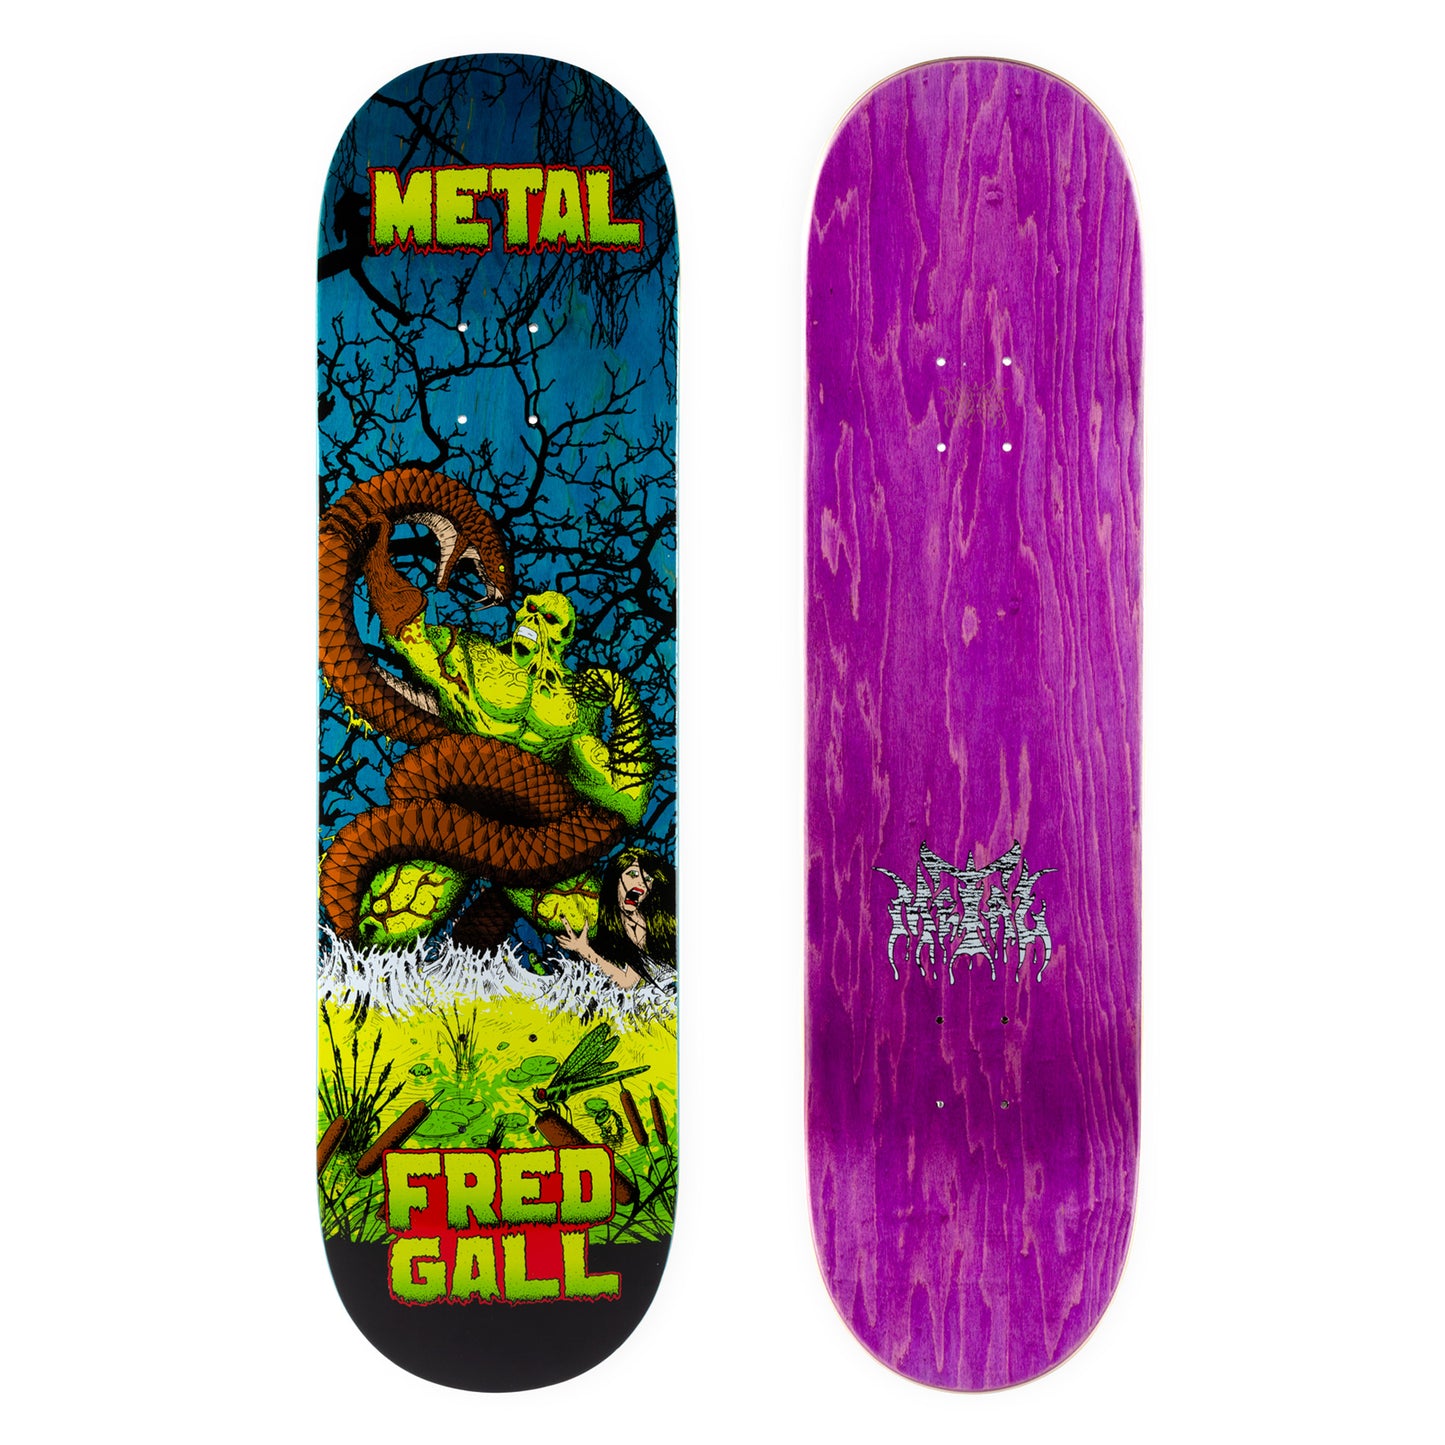 FRED GALL SWAMP THING 8.25